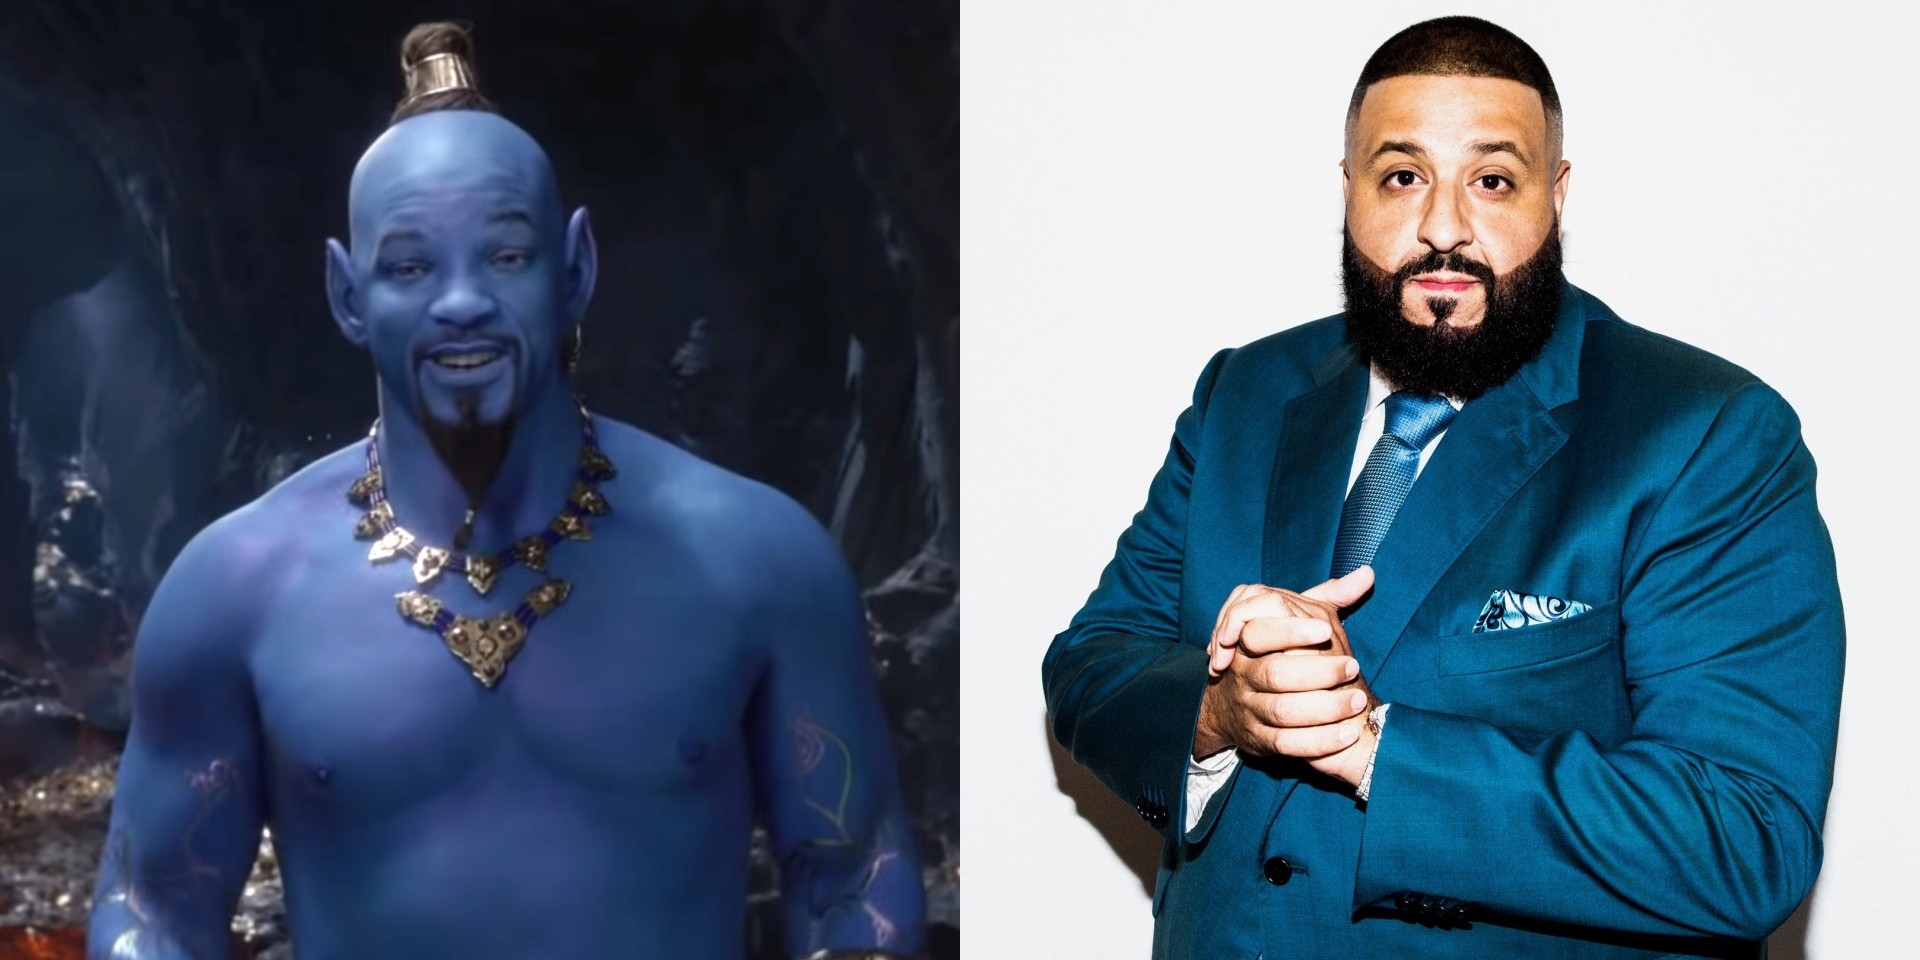 Will Smith and DJ Khaled release "hip-hop" rendition of Aladdin classic 'Friend Like Me' – listen